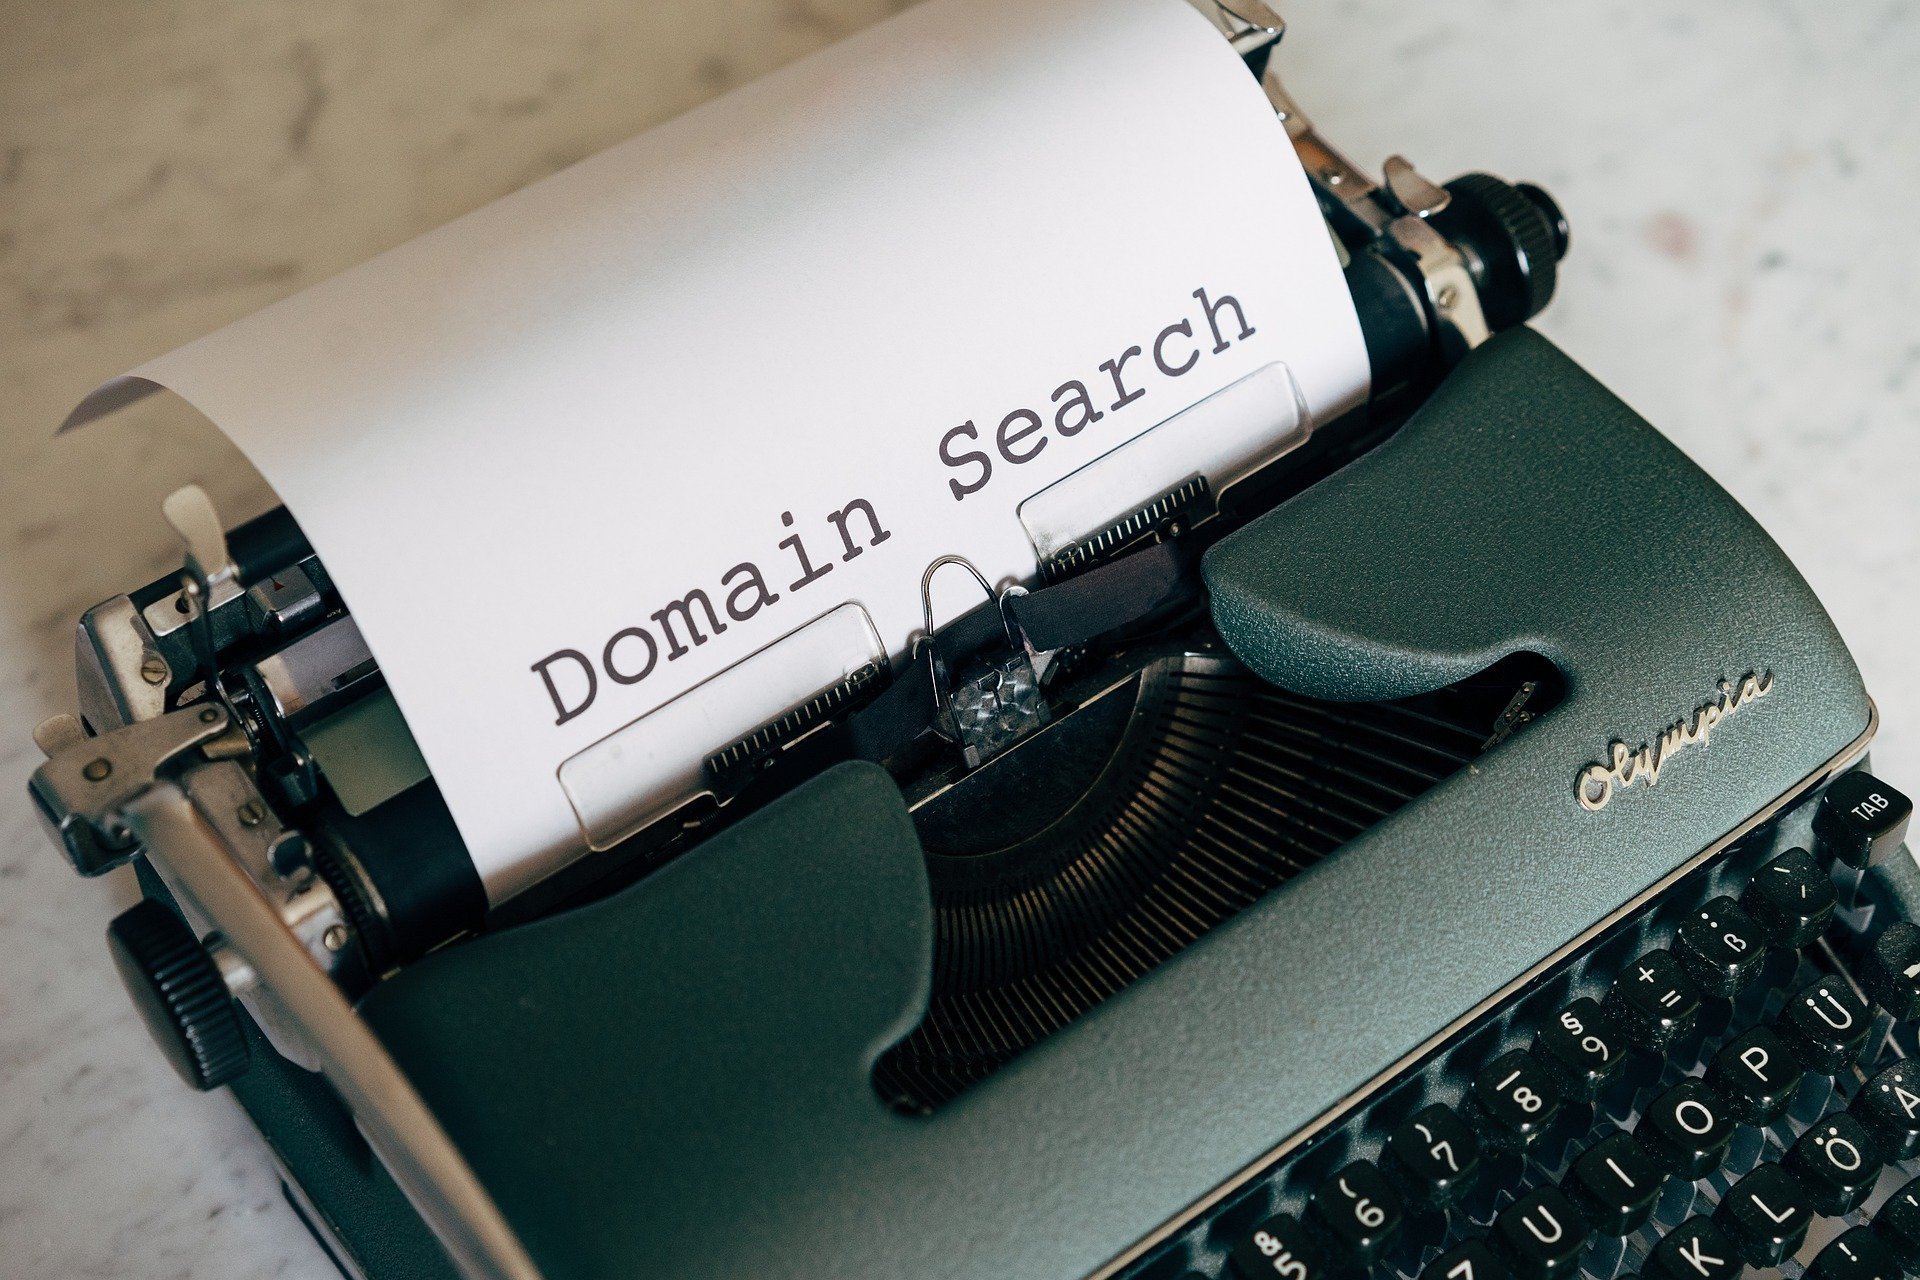 How important is a domain name?